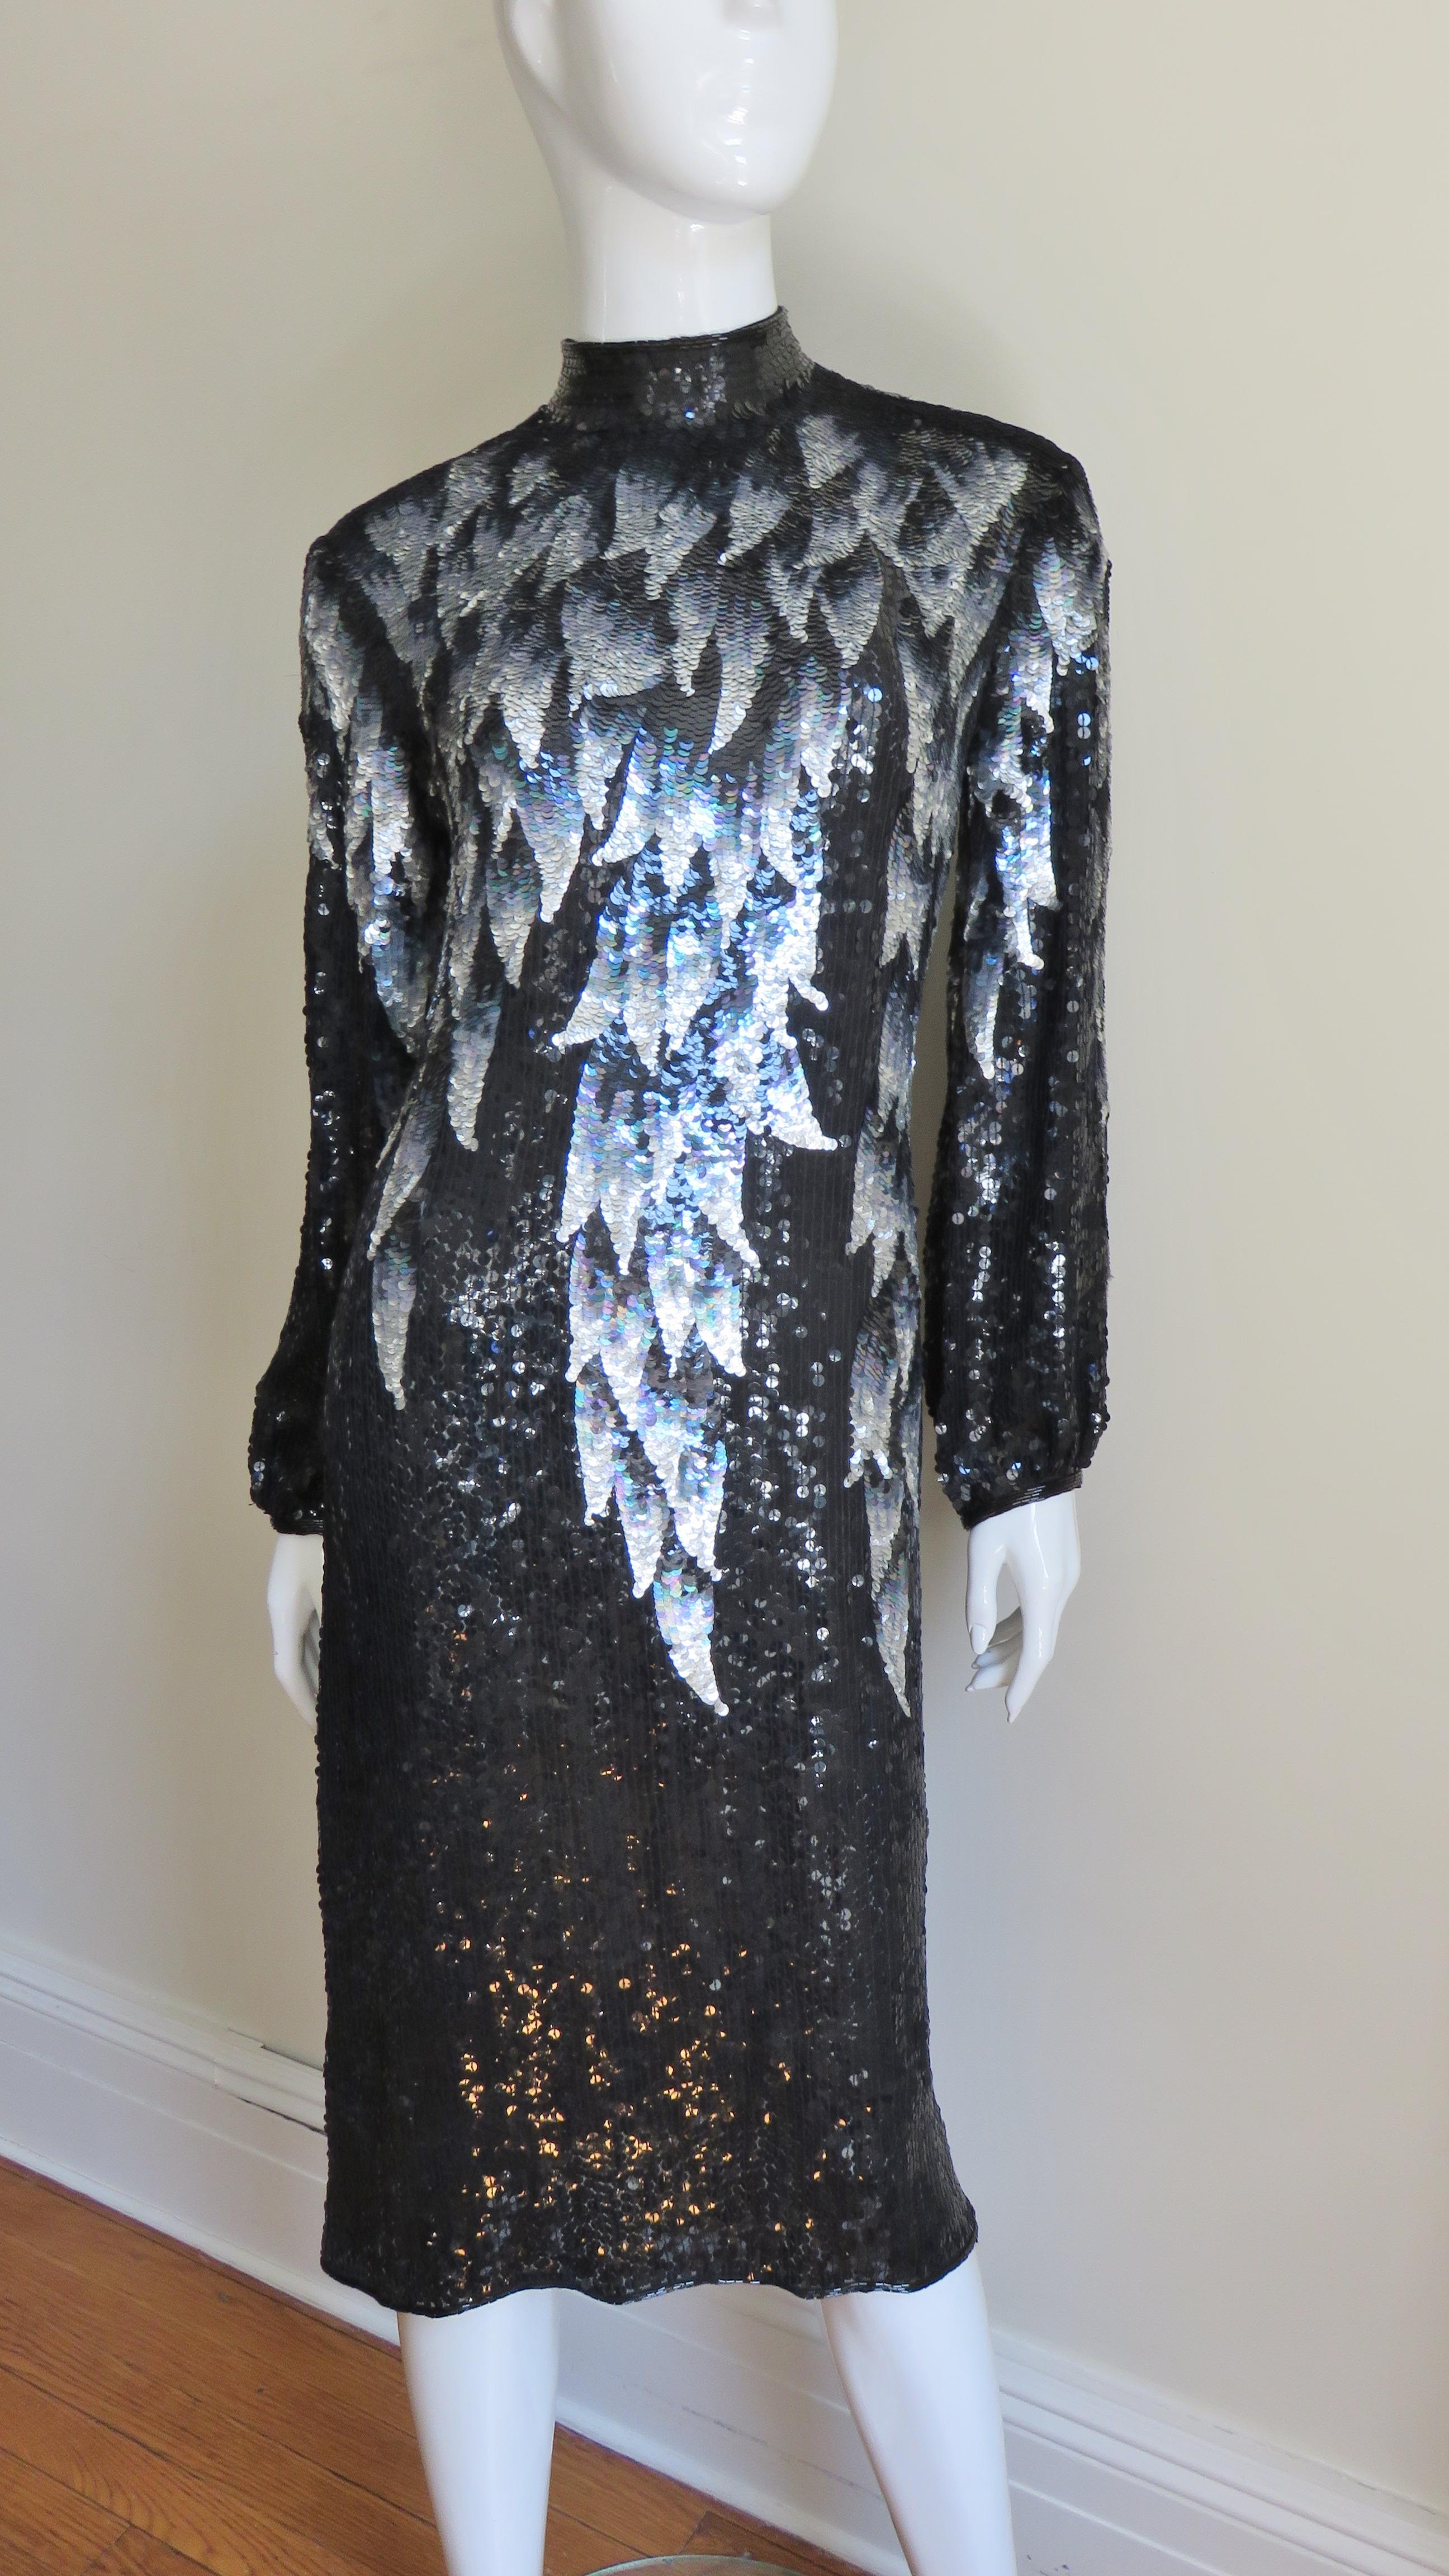 A fabulous black sequin silk dress from Halston.  The background is comprised of black sequins throughout the dress with an elaborate sequin pattern in shades of grey and silver raining down from the top of the dress front, back and sleeves.  The